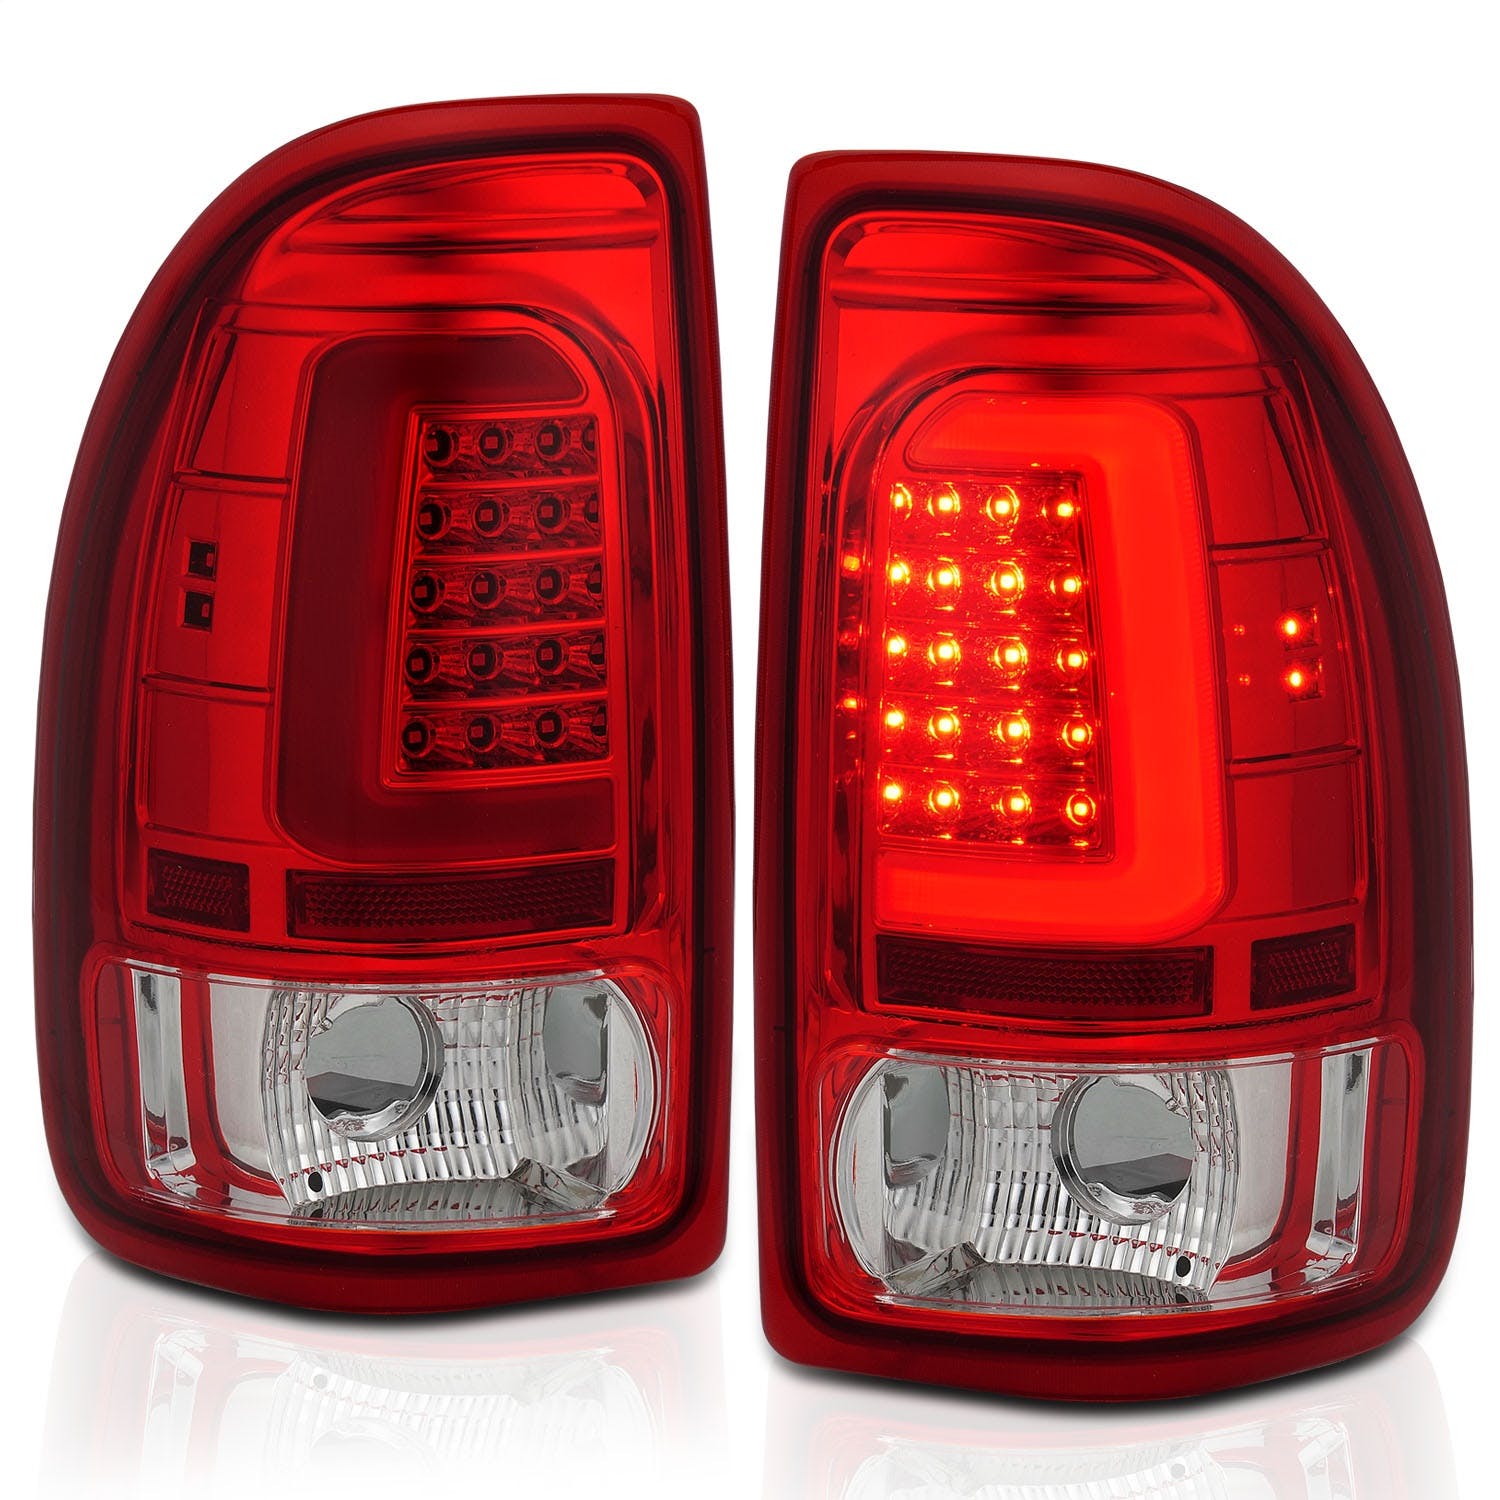 AnzoUSA 311349 LED Taillights Chrome Housing Red Lens